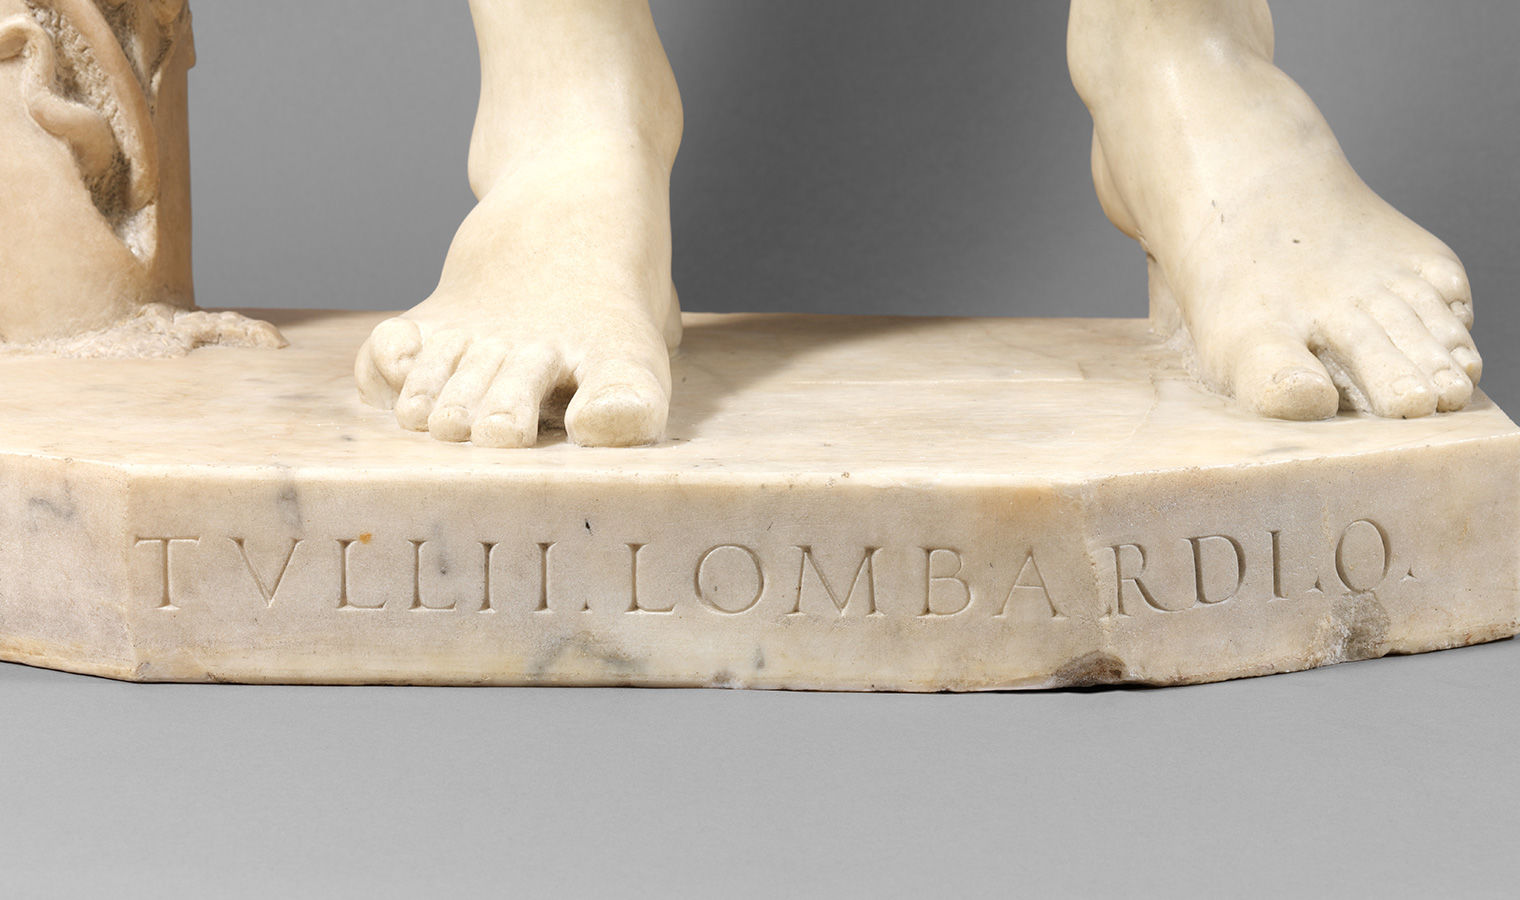 Detail image of Adam's base showing Tullio Lombardo's signature carved into the marble.